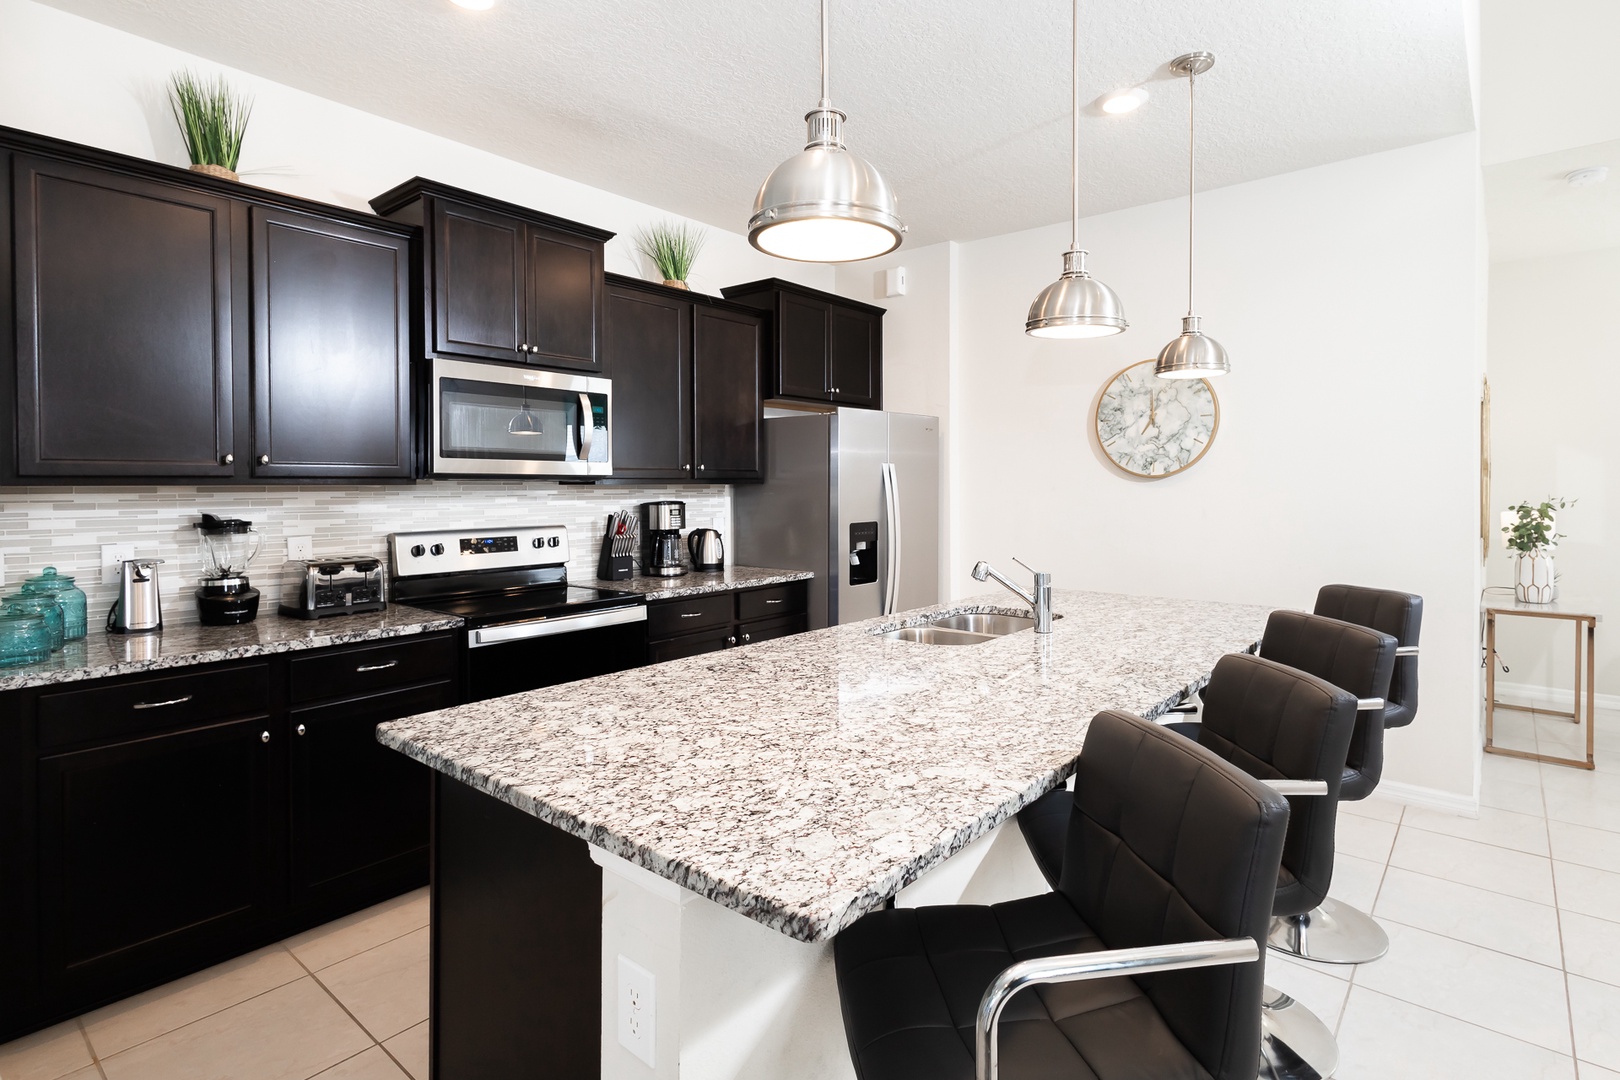 The chic, updated kitchen is well equipped with all the comforts of home